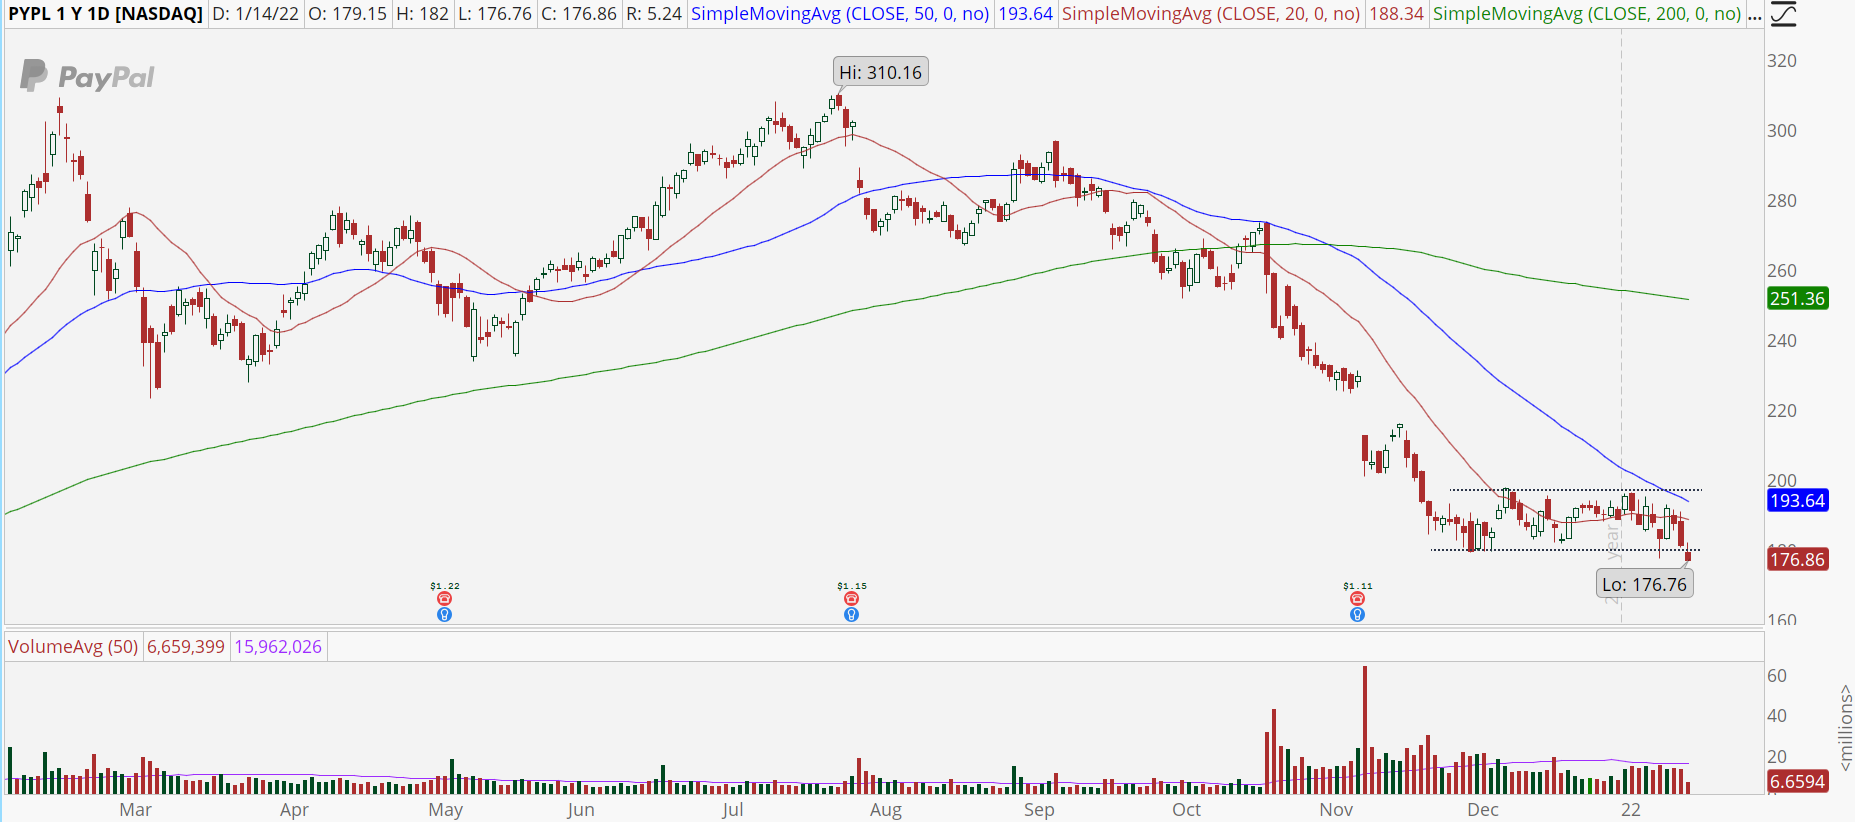 Paypal stock chart (PYPL) with bear breakthrough.